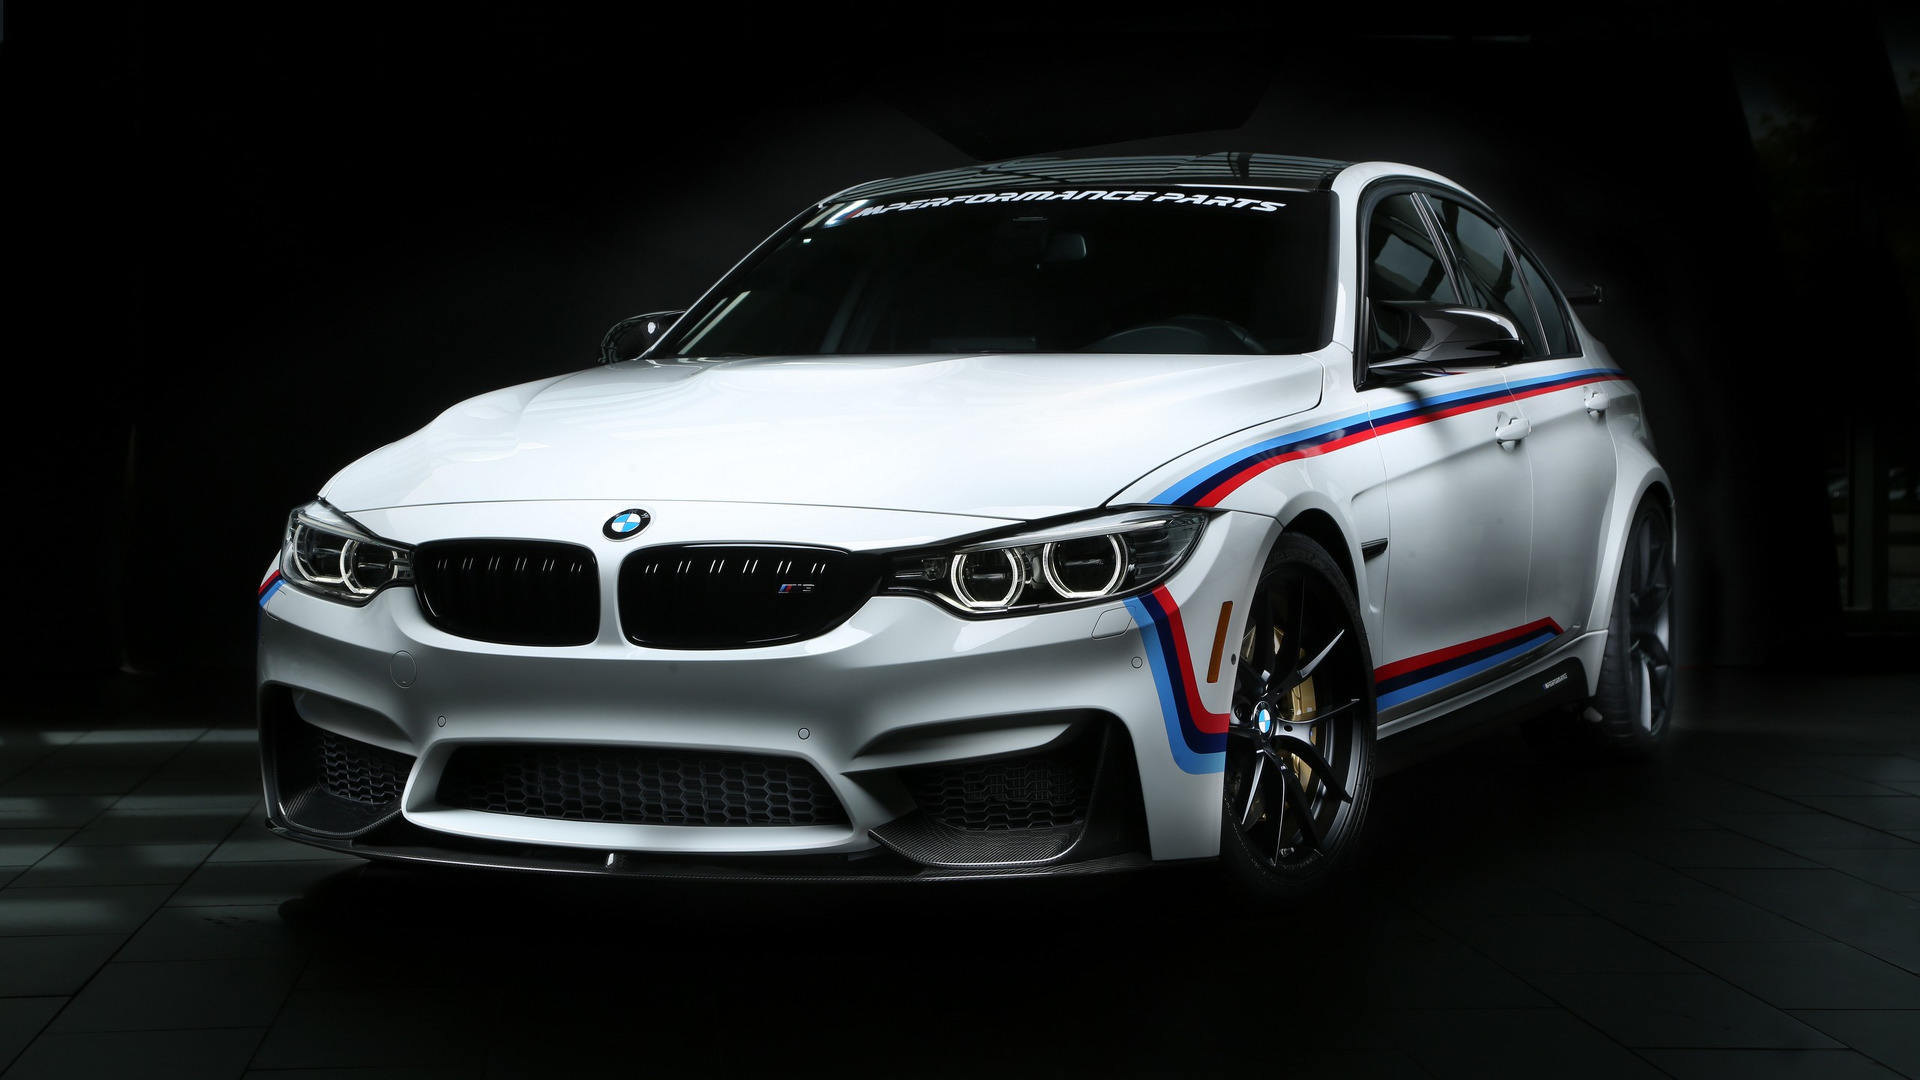 Latest BMW M parts to debut at SEMA, new aero kit for M3/M4